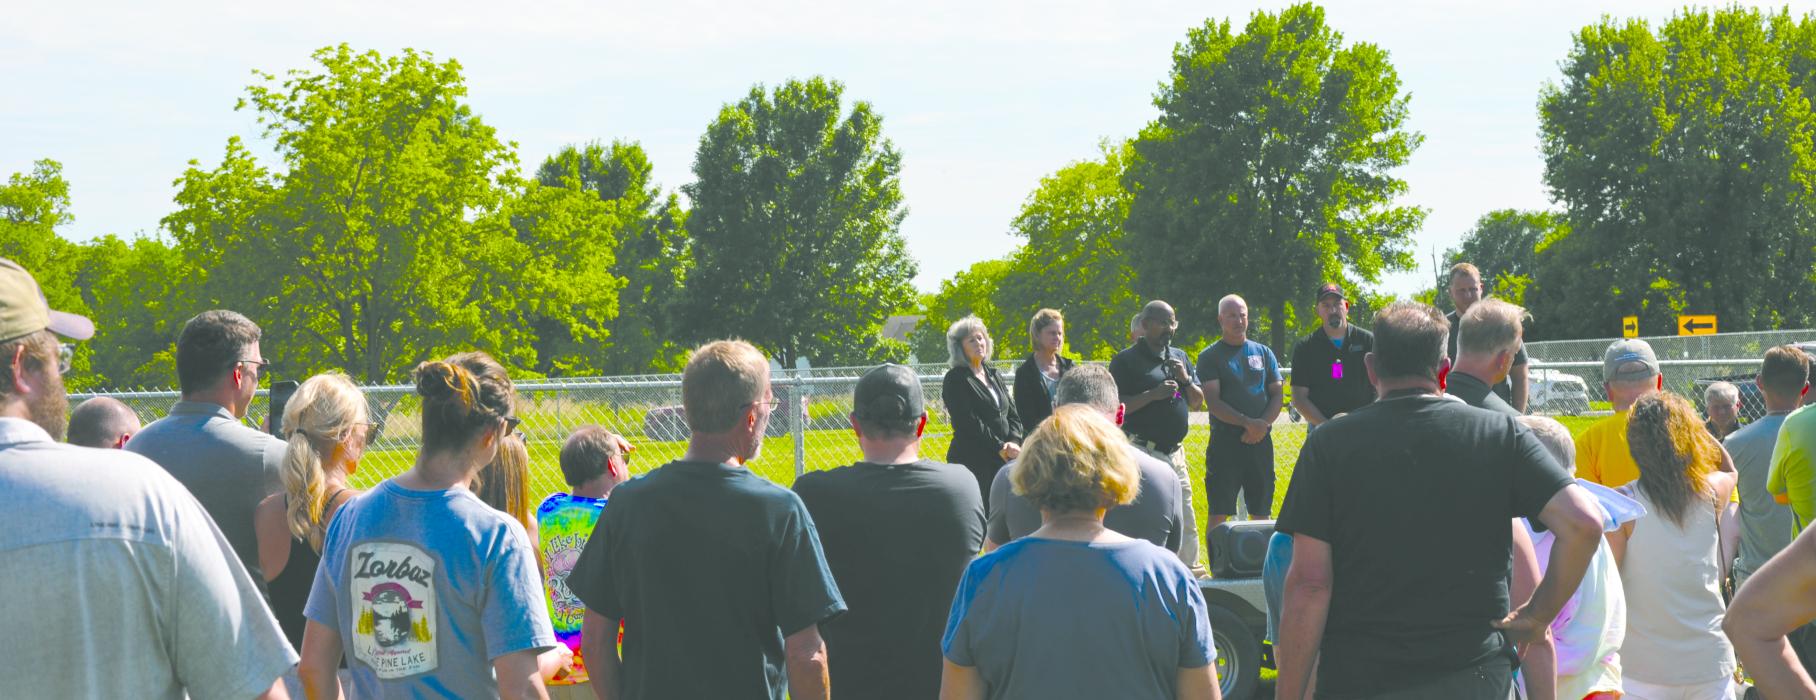 On Sunday, June 30, a crowd gathered near the Izaak Walton League, in McCook Lake, for a press conference to address the recent flooding to the area.